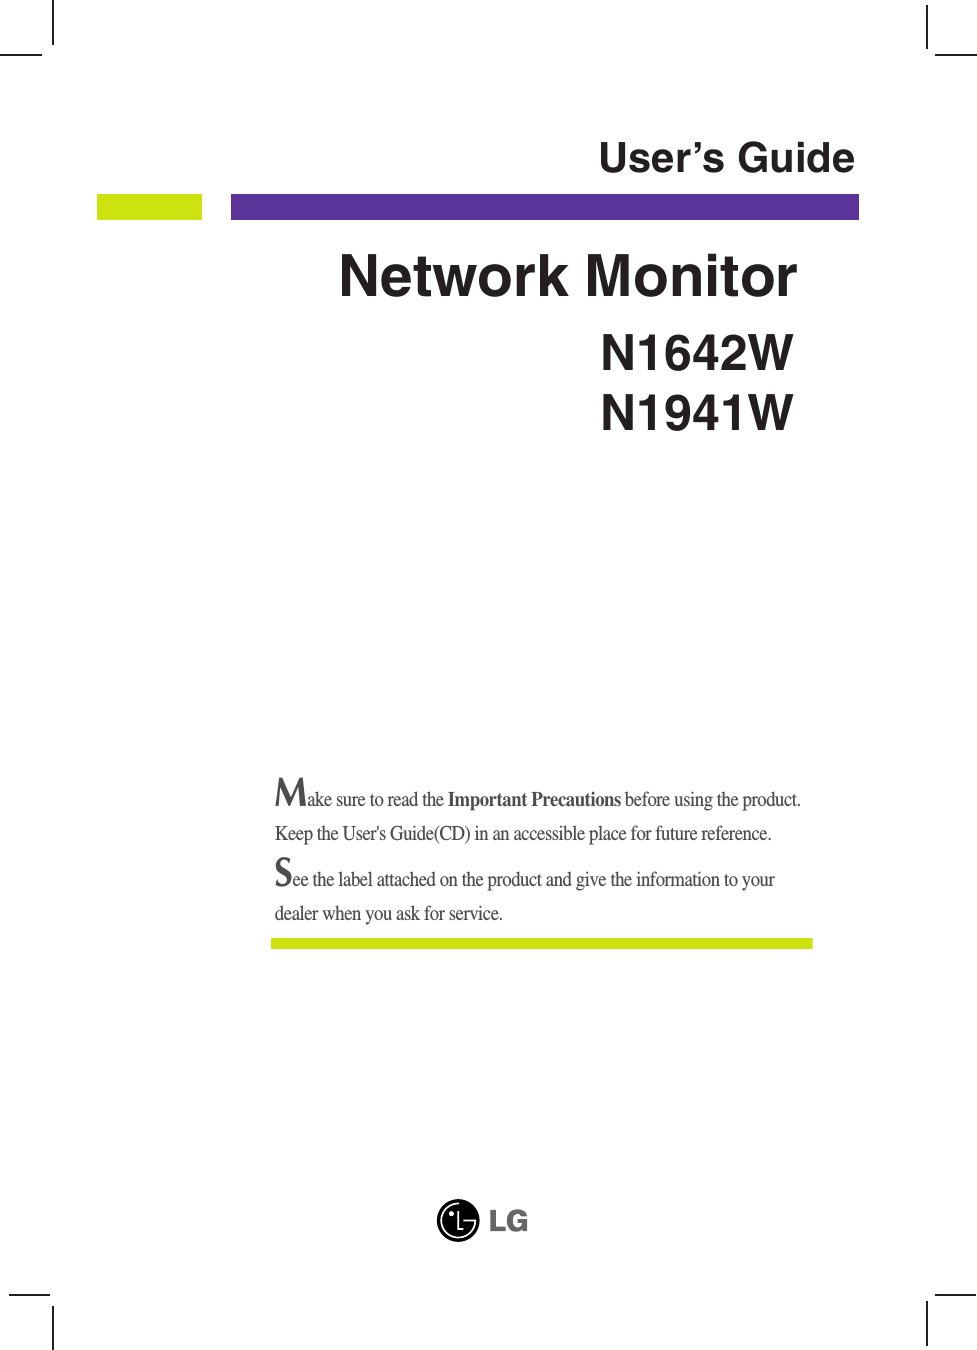 N1642WN1941WUser’s GuideNetwork MonitorMake sure to read the Important Precautions before using the product. Keep the User&apos;s Guide(CD) in an accessible place for future reference.See the label attached on the product and give the information to yourdealer when you ask for service.